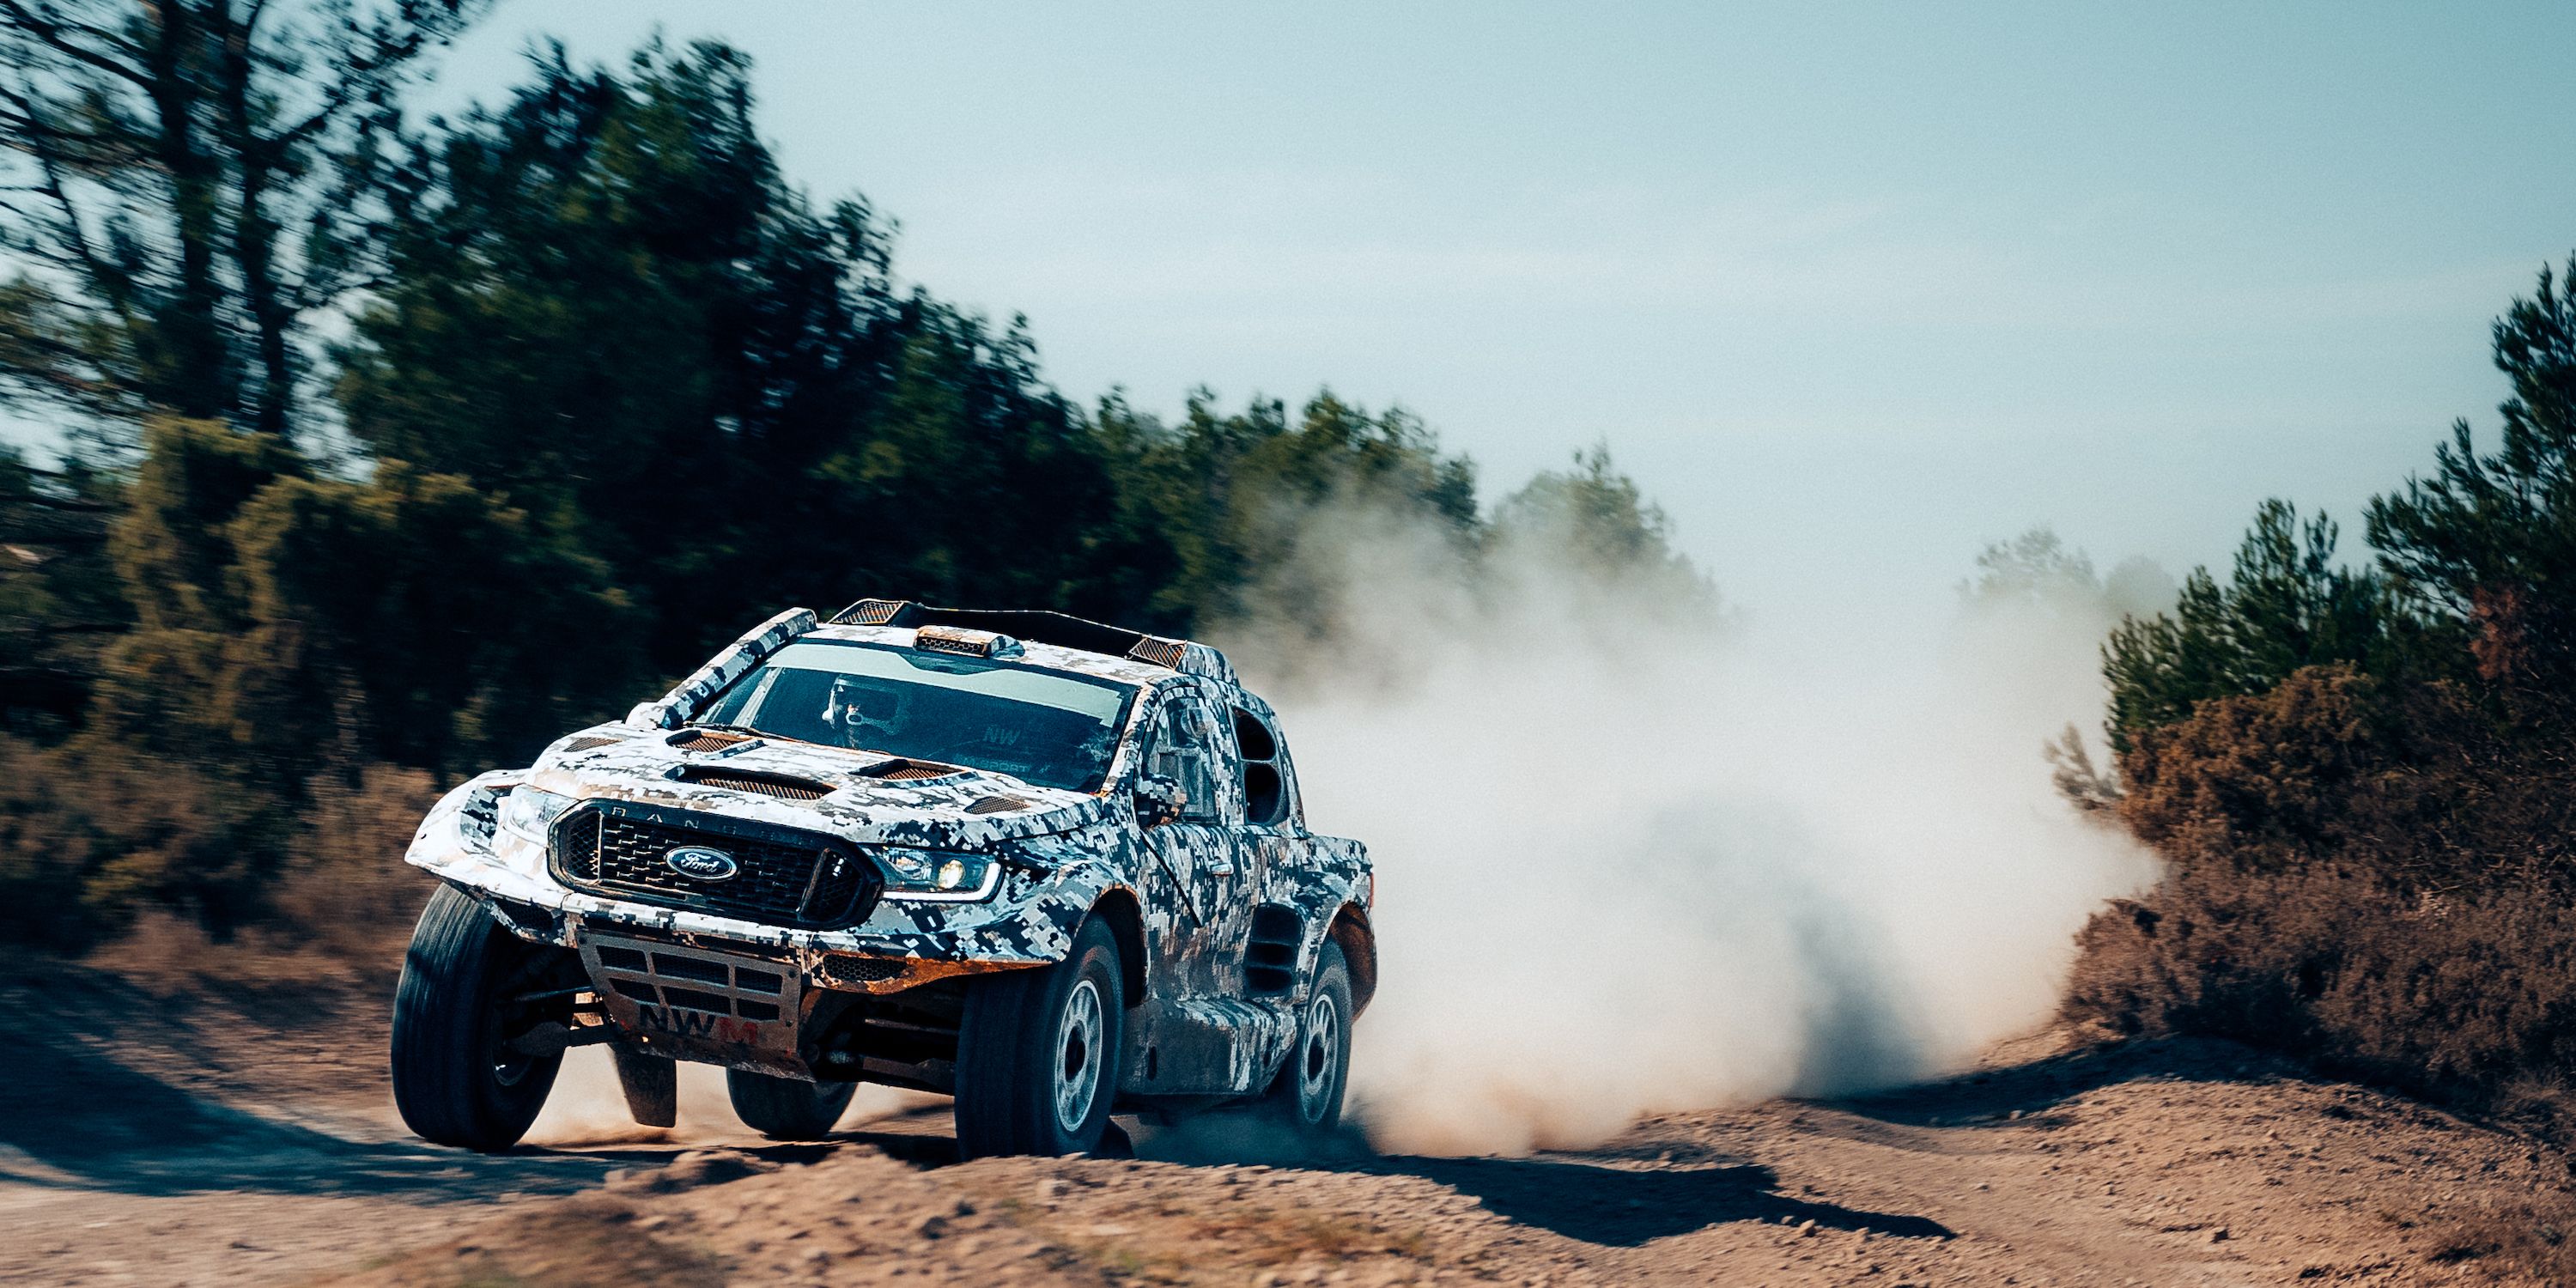 The Ford Ranger Will Take on the Dakar Rally in 2024